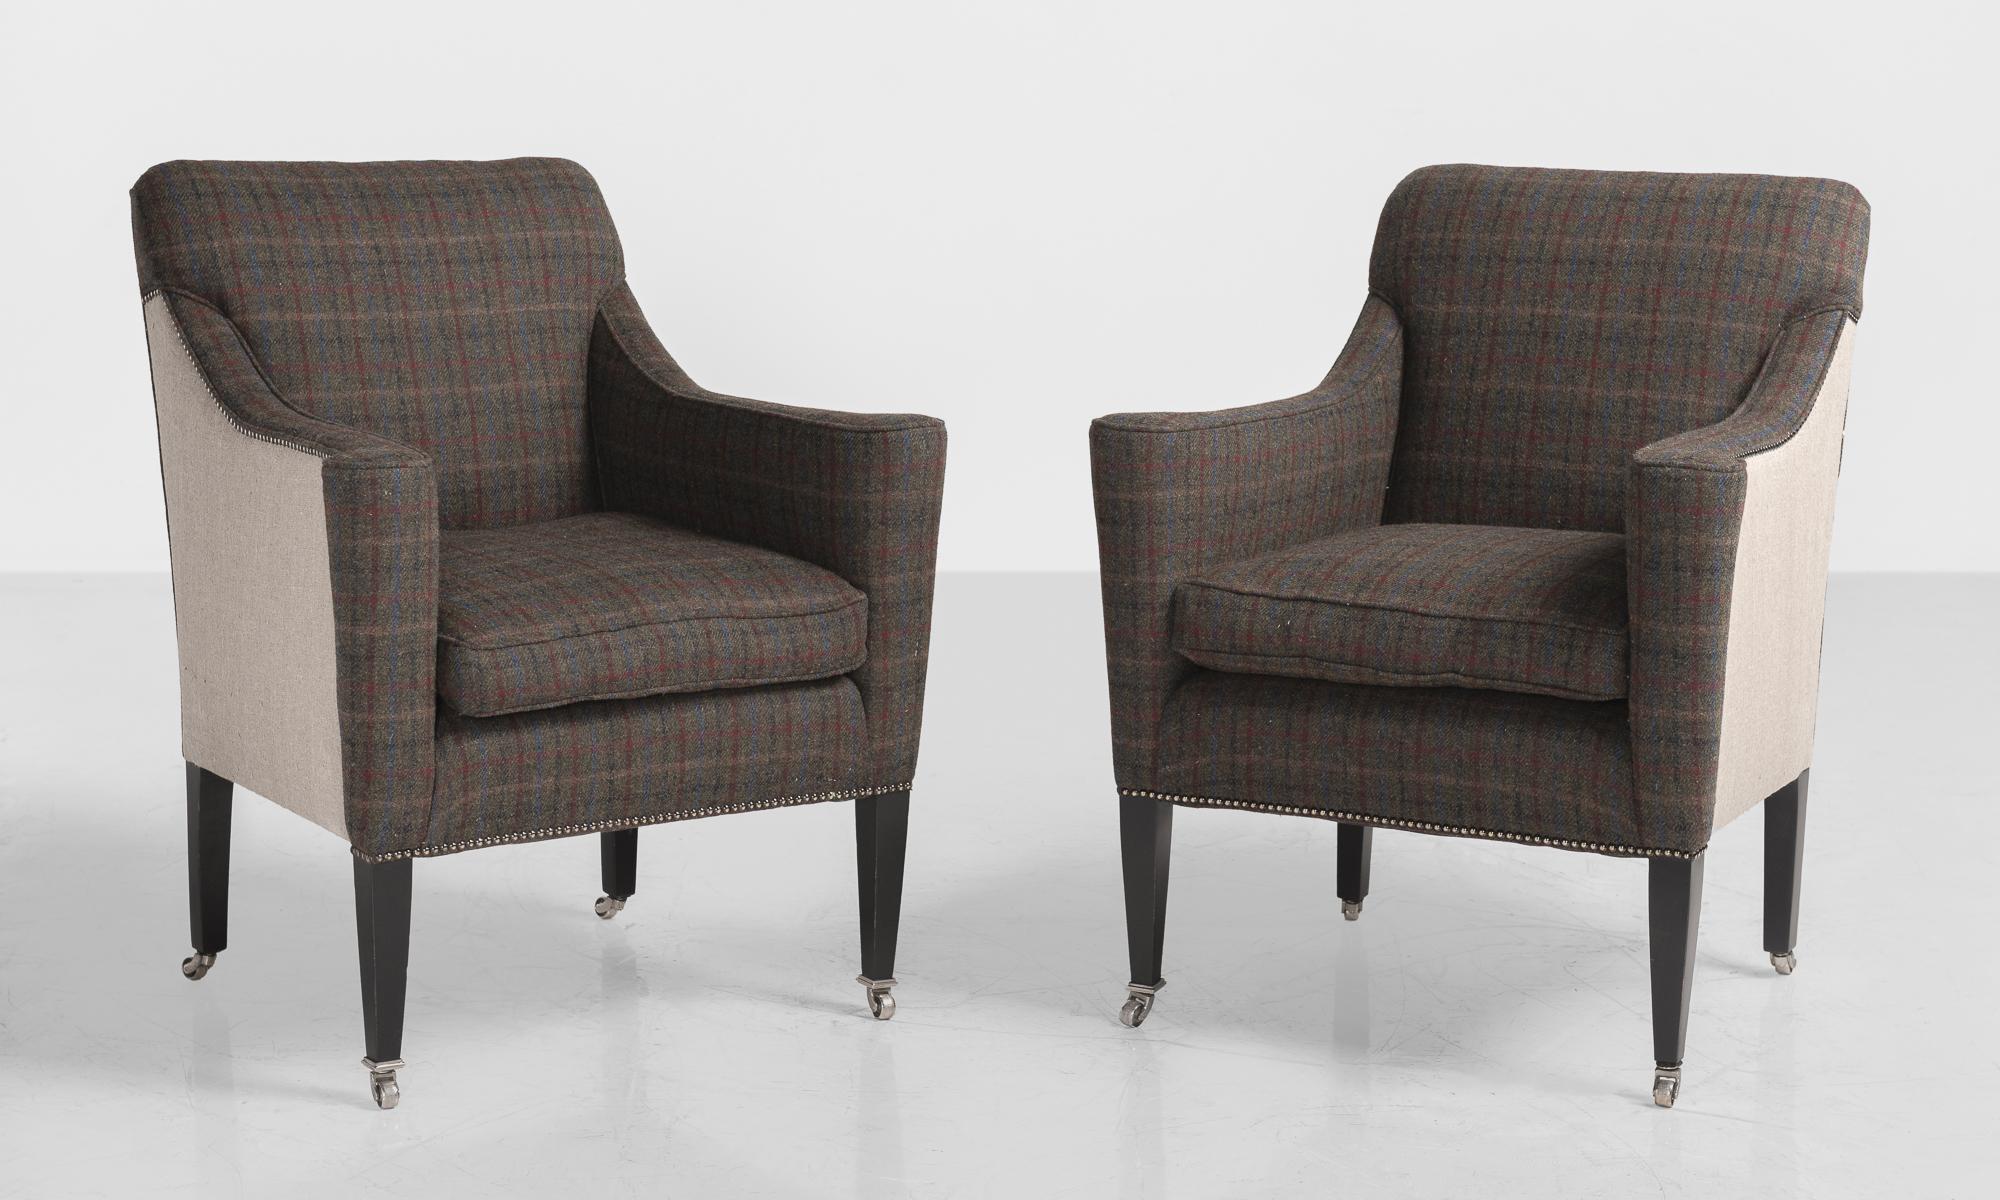 Pair of Art Deco Wool Flannel Armchairs, England, circa 1930

Elegant form. Newly upholstered in wool flannel with wooden legs and chrome castors.

Measures: 29